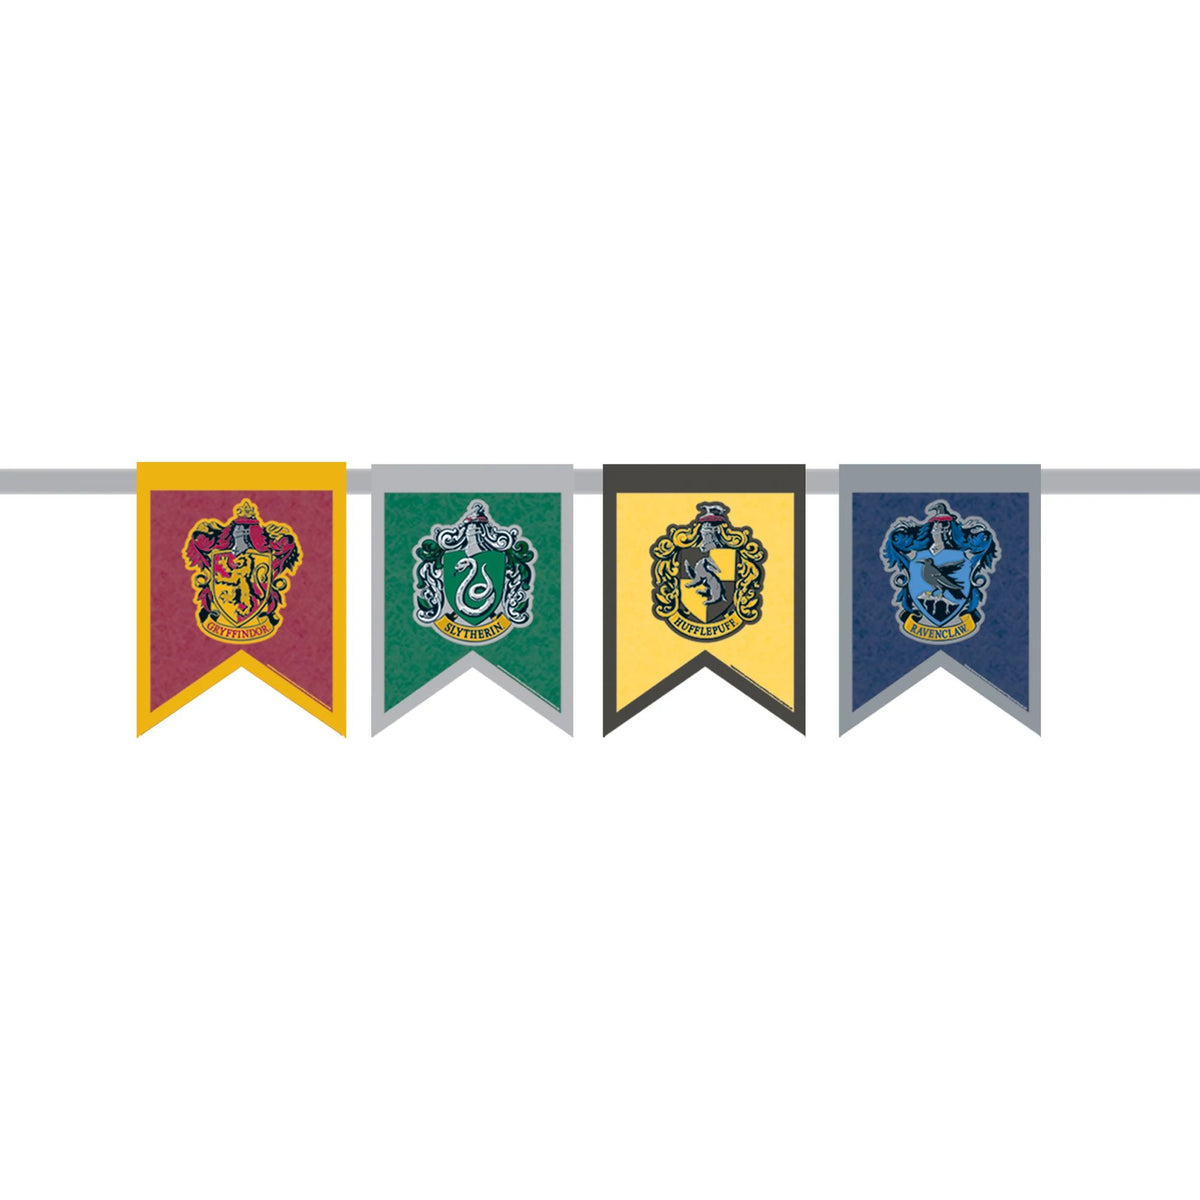 Printable Hogwarts House Crest Banners! Each banner measures 8.25x10.75.  You are purchasing a…